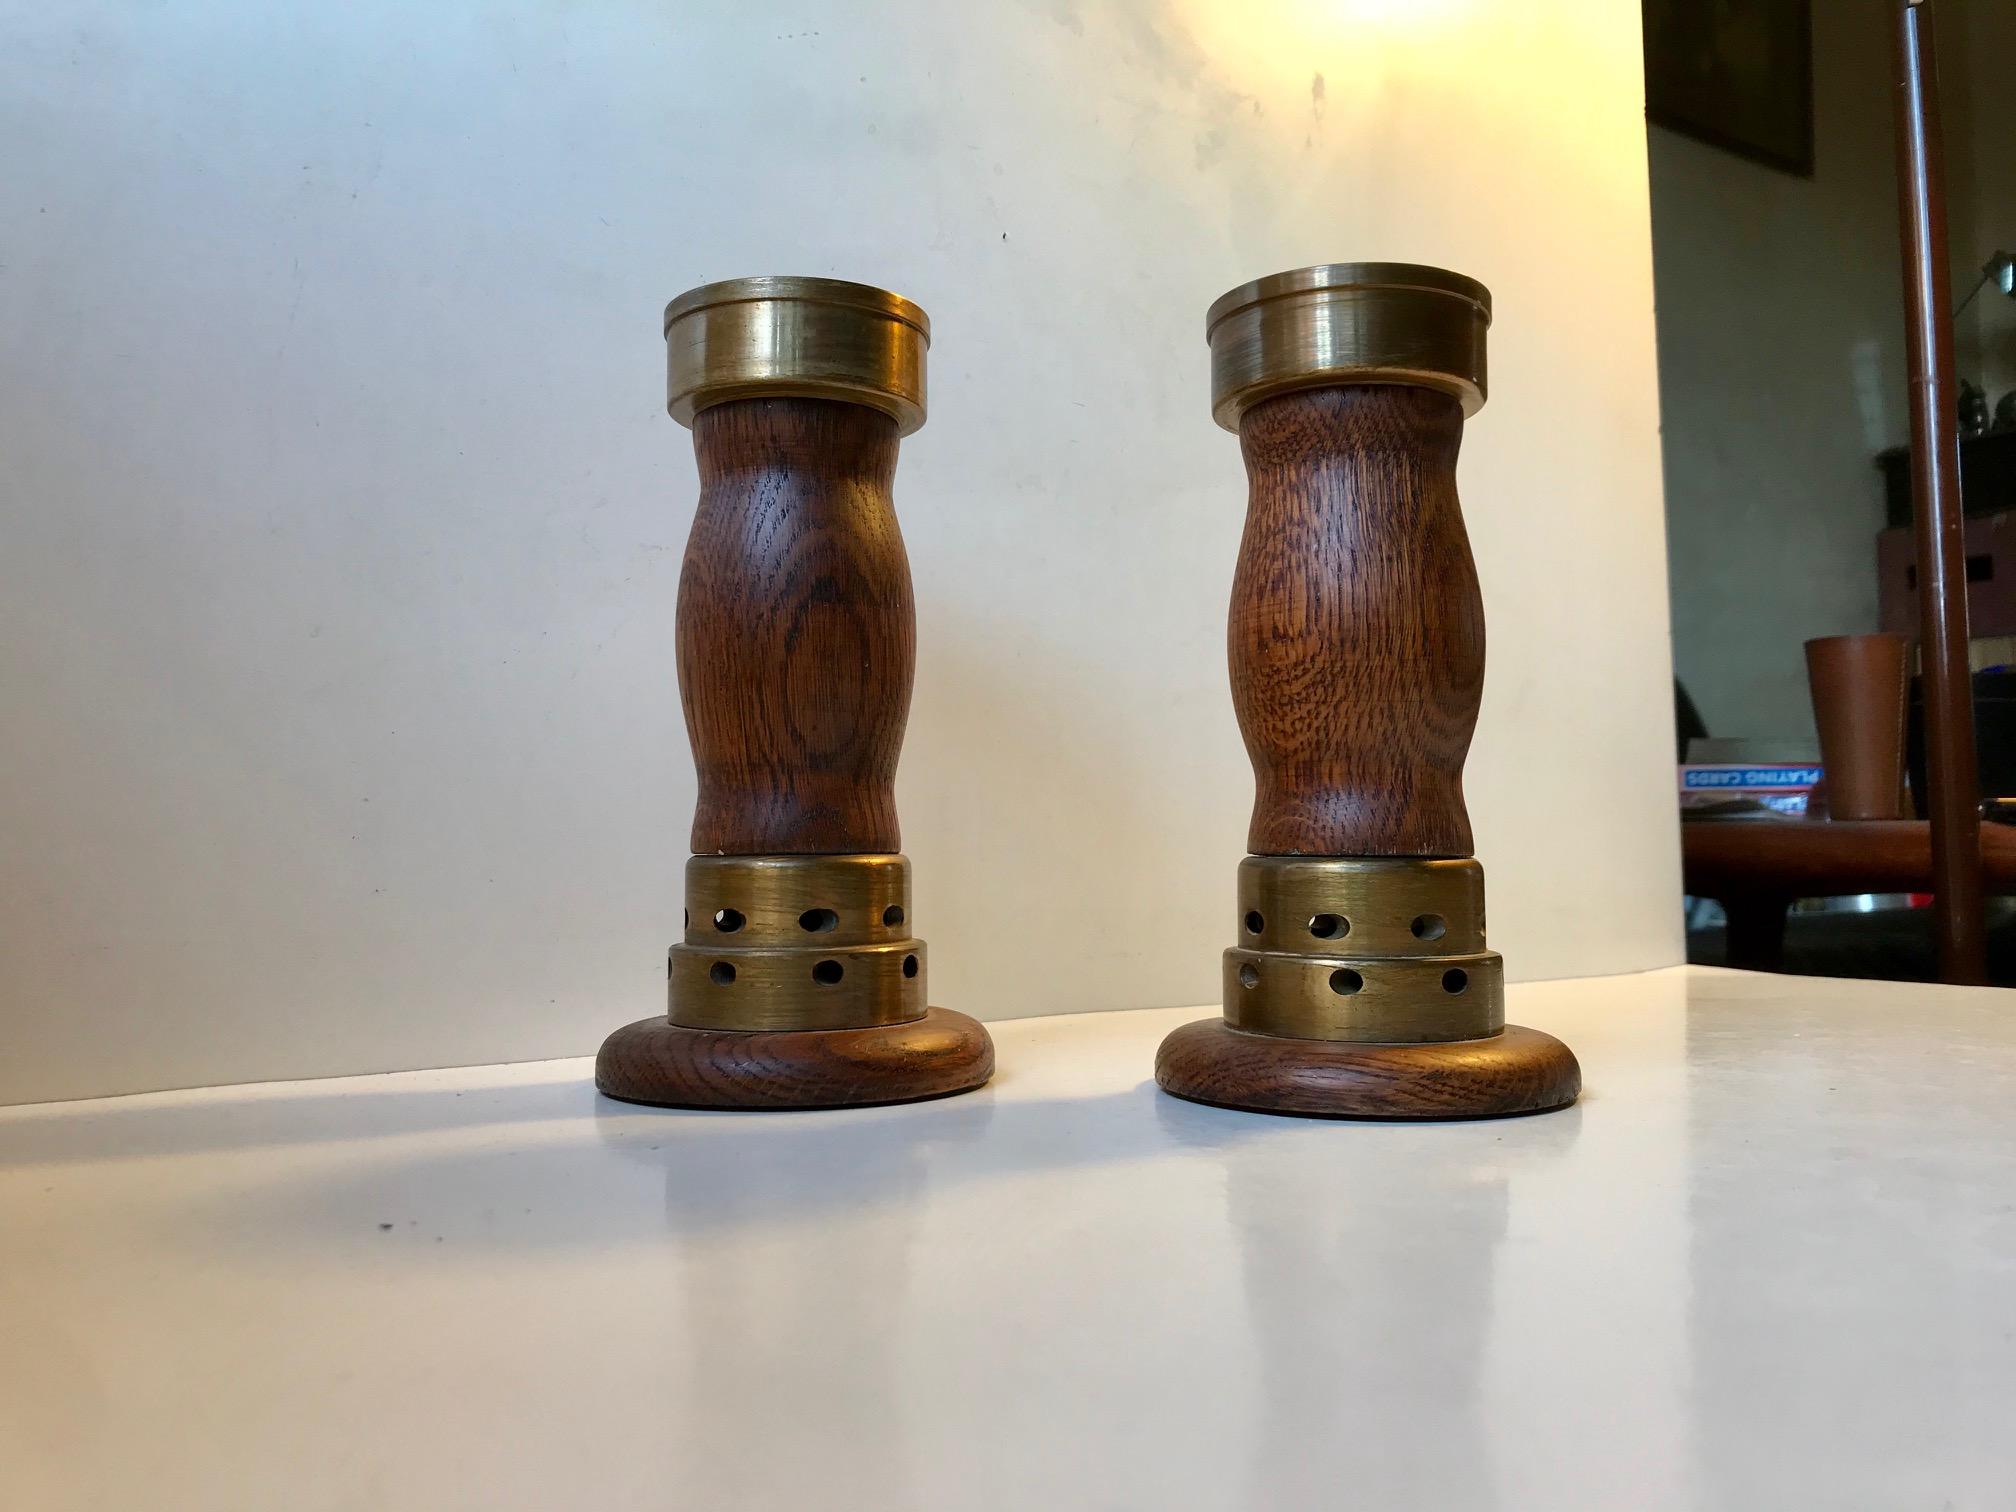 A pair of church candlesticks in oak and partially cross drilled bronze. These came out of a Church Near Vejen in the Eastern part of Denmark. The design is very plain and almost has an Art Deco appearance to them. They have not been polished